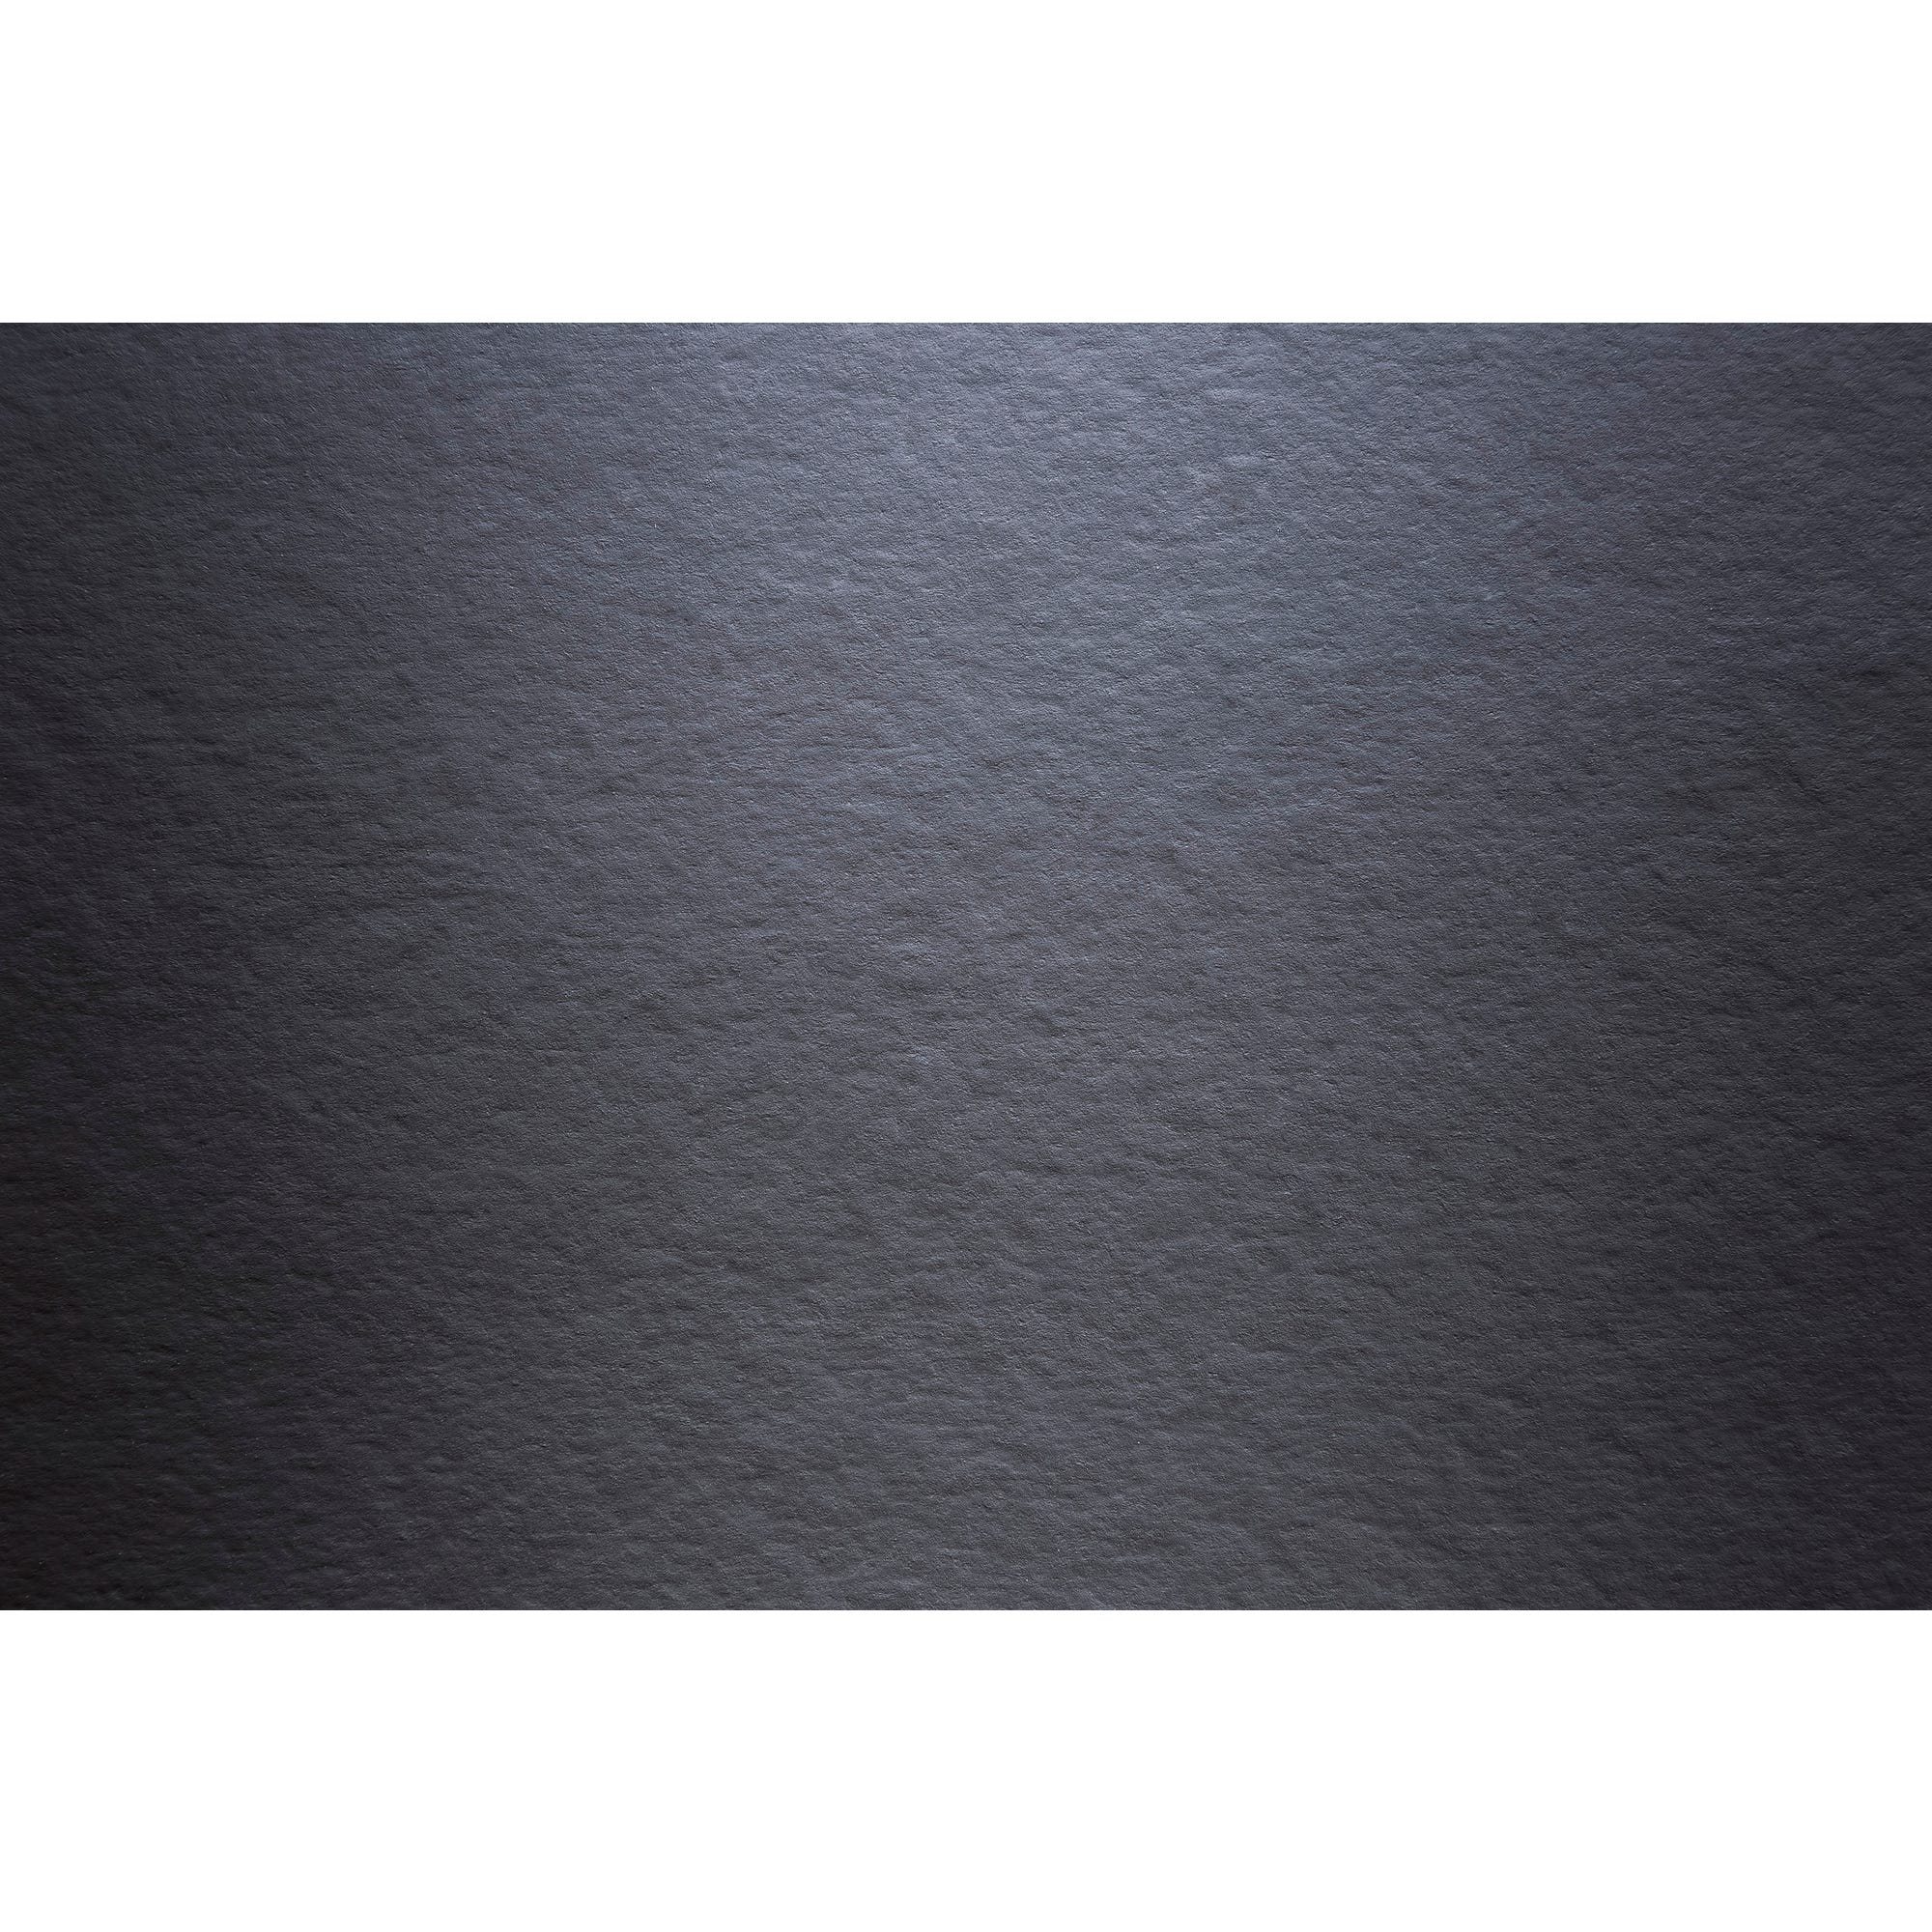 Clin pour bardage gris anthracite L.3600 × l.180 × Ep.8 mm HardiePlank Smooth 1